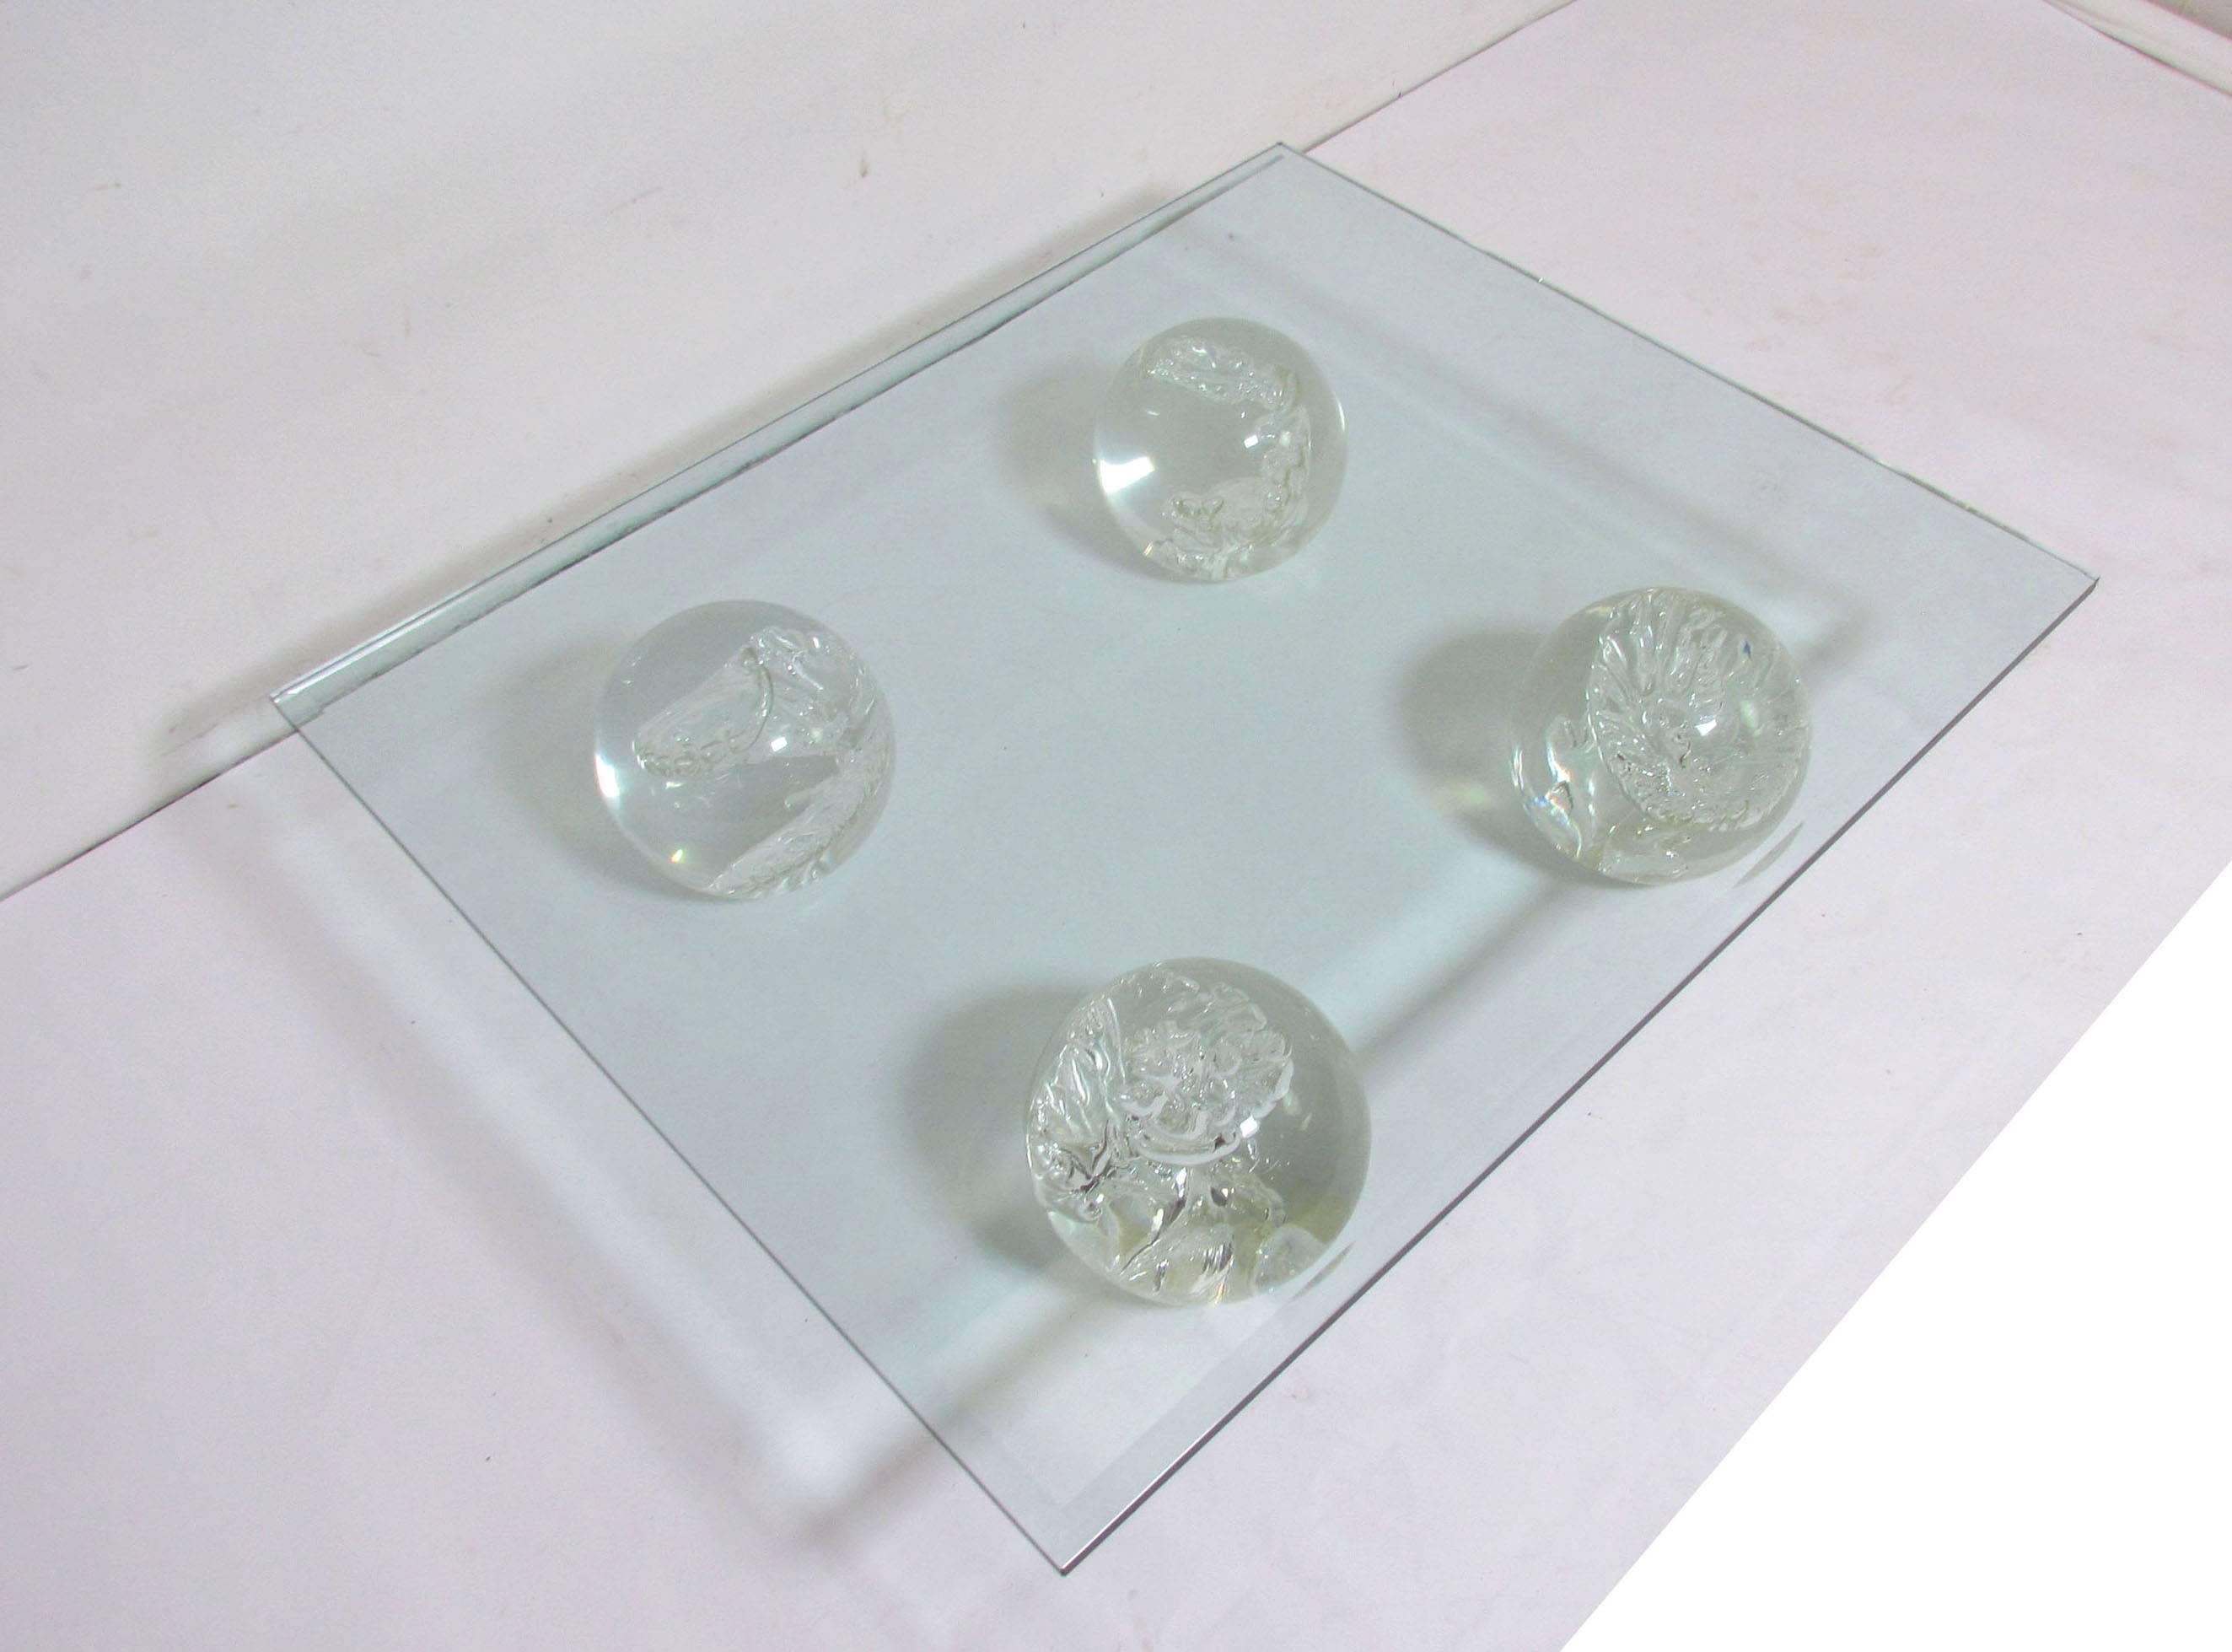 Post-Modern Coffee Table with Resin Balls in Manner of Pierre Giraudon